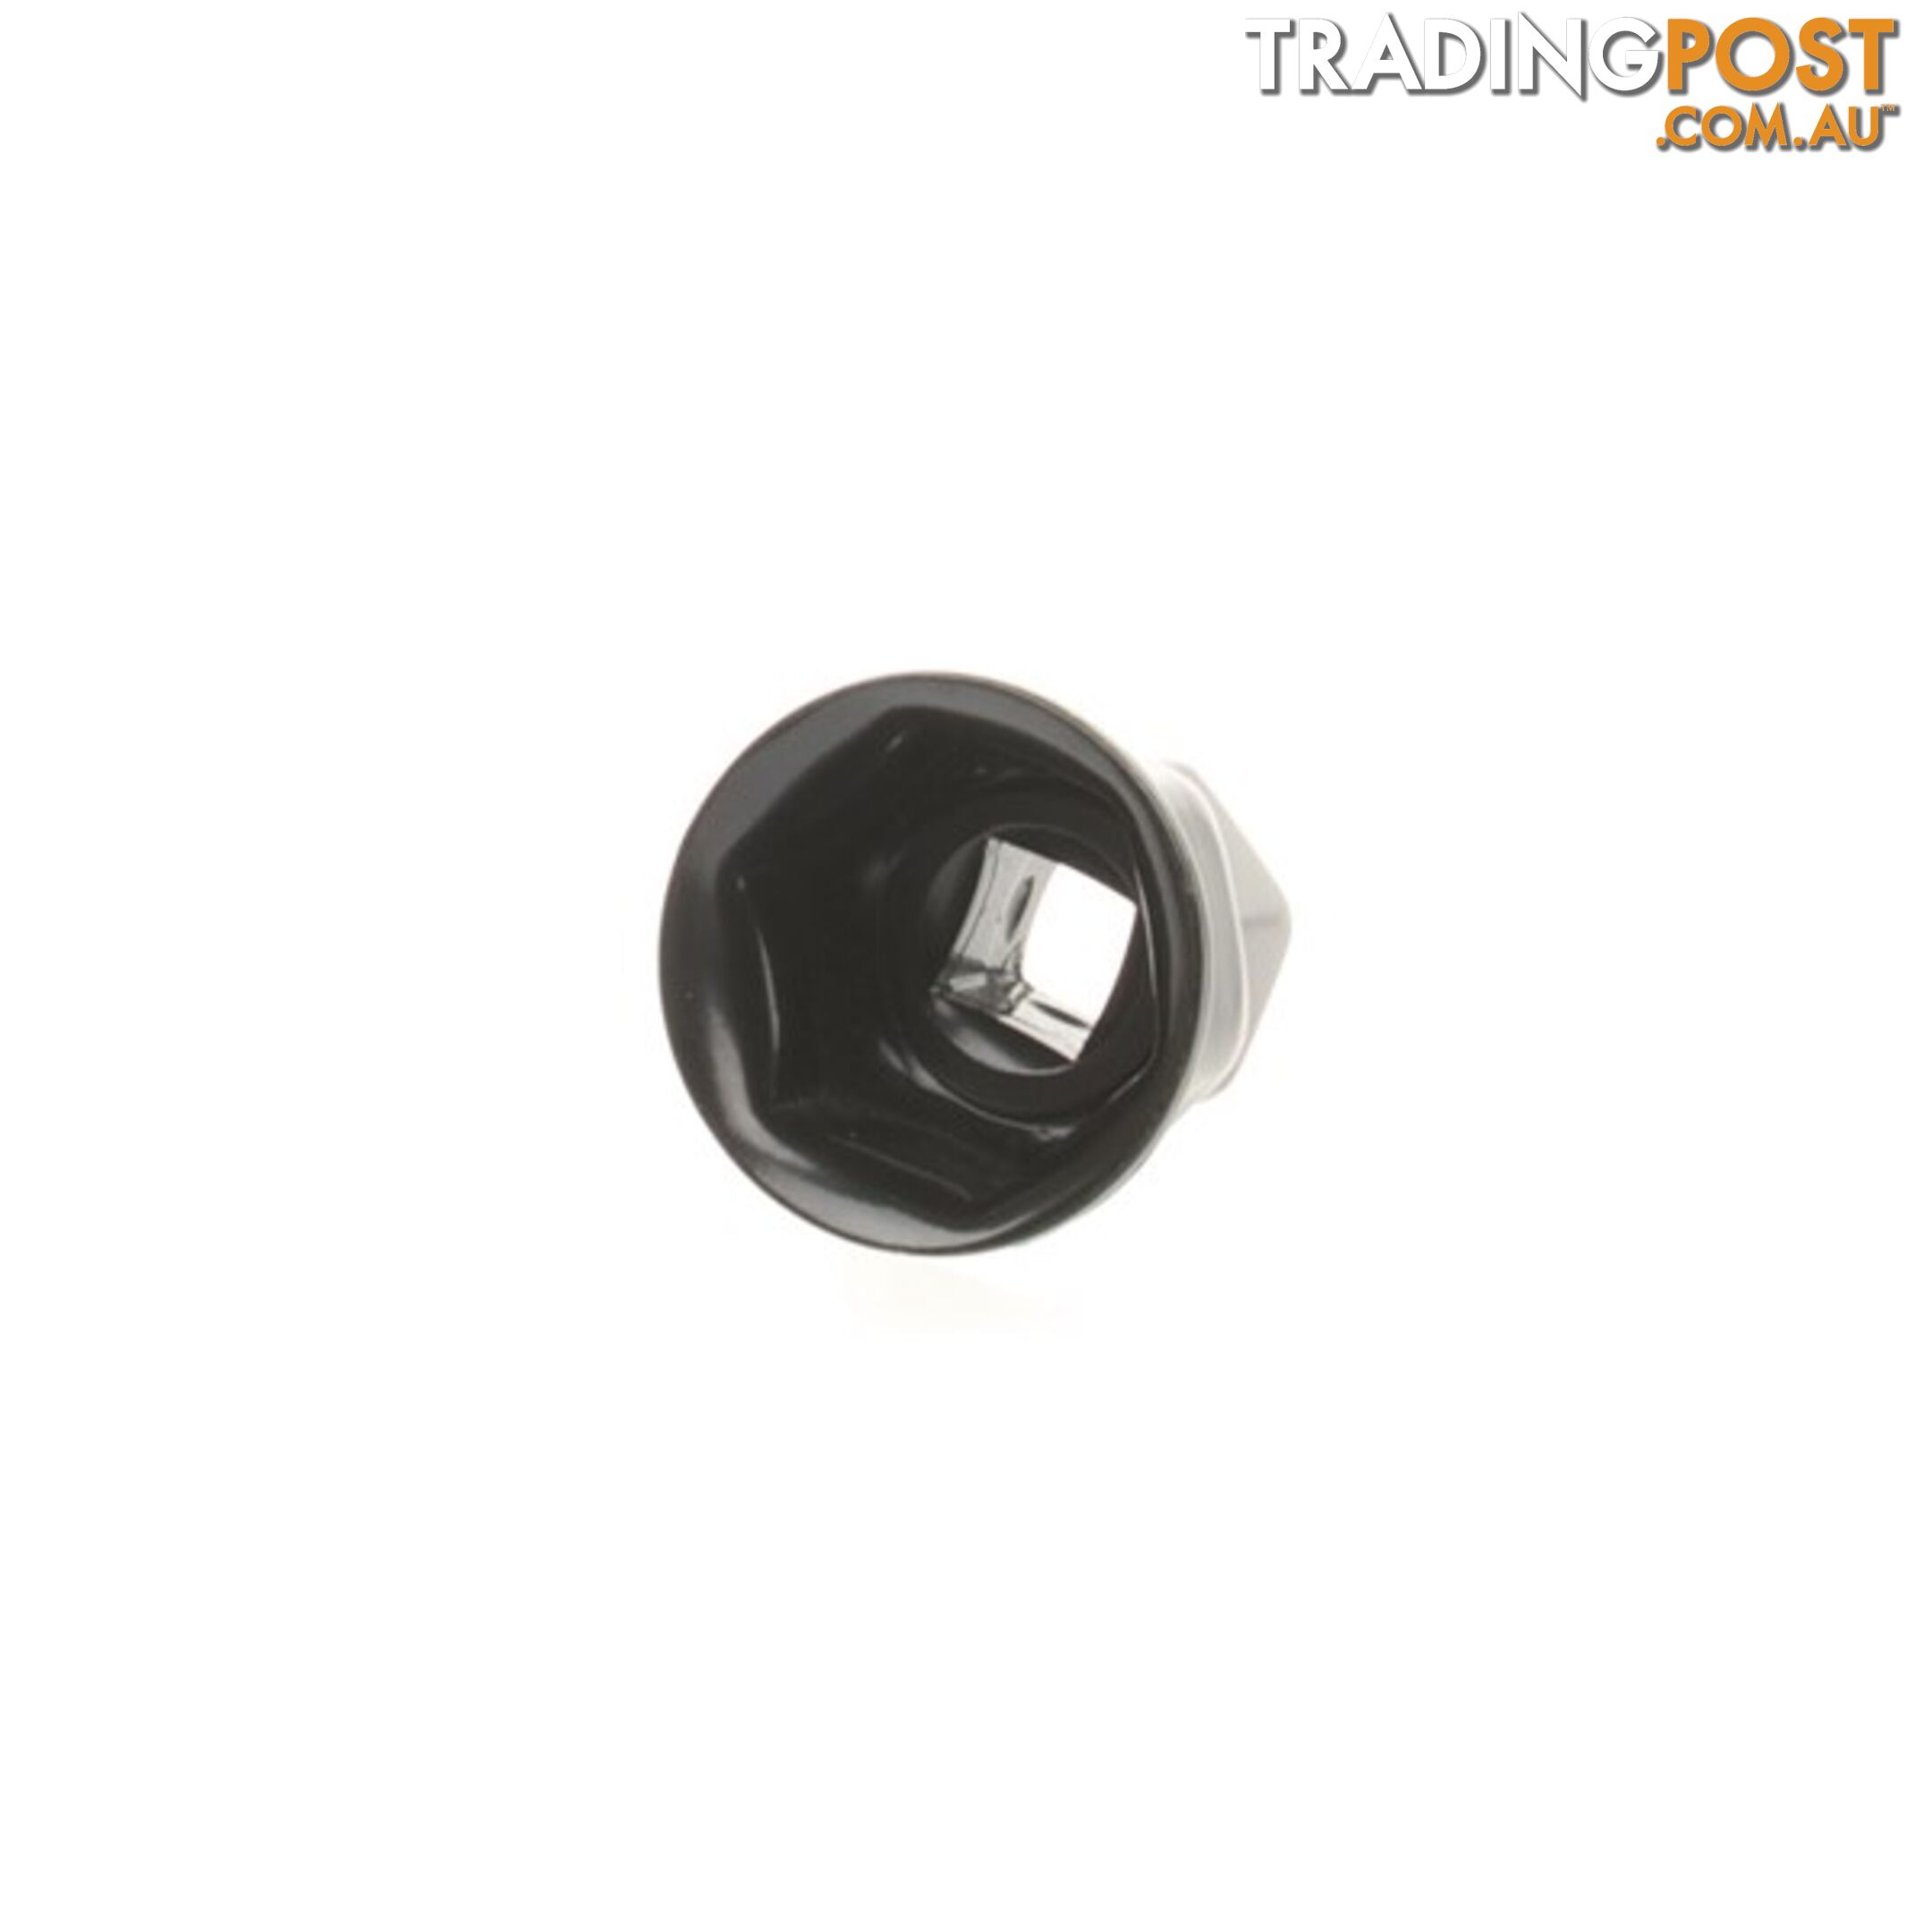 Oil Filter Cup Wrench  - 24mm 6 Flutes SKU - 305103